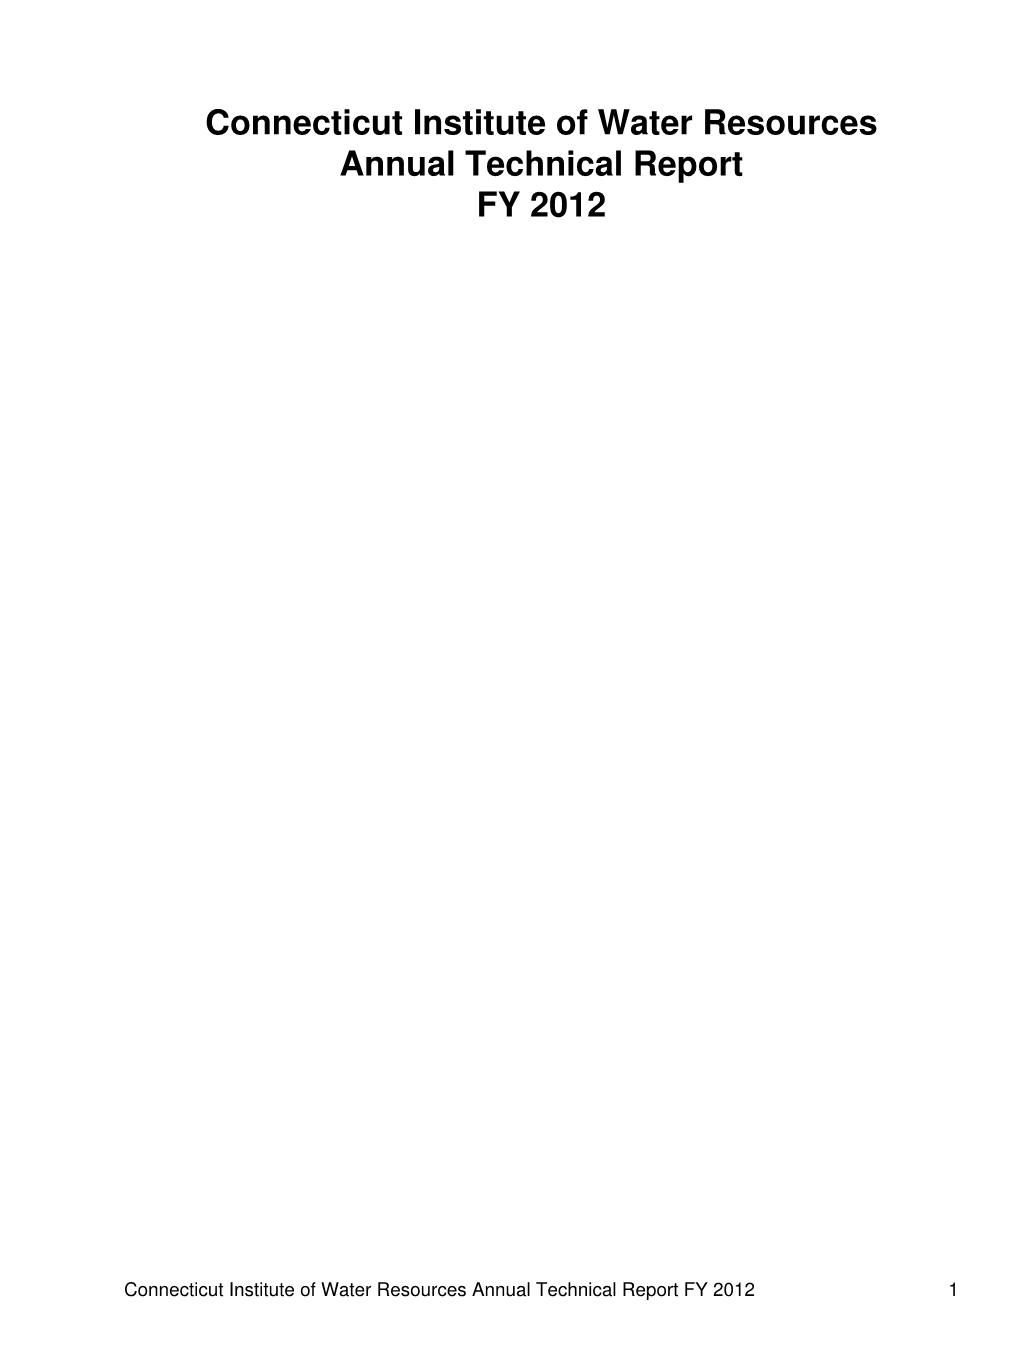 Connecticut Institute of Water Resources Annual Technical Report FY 2012